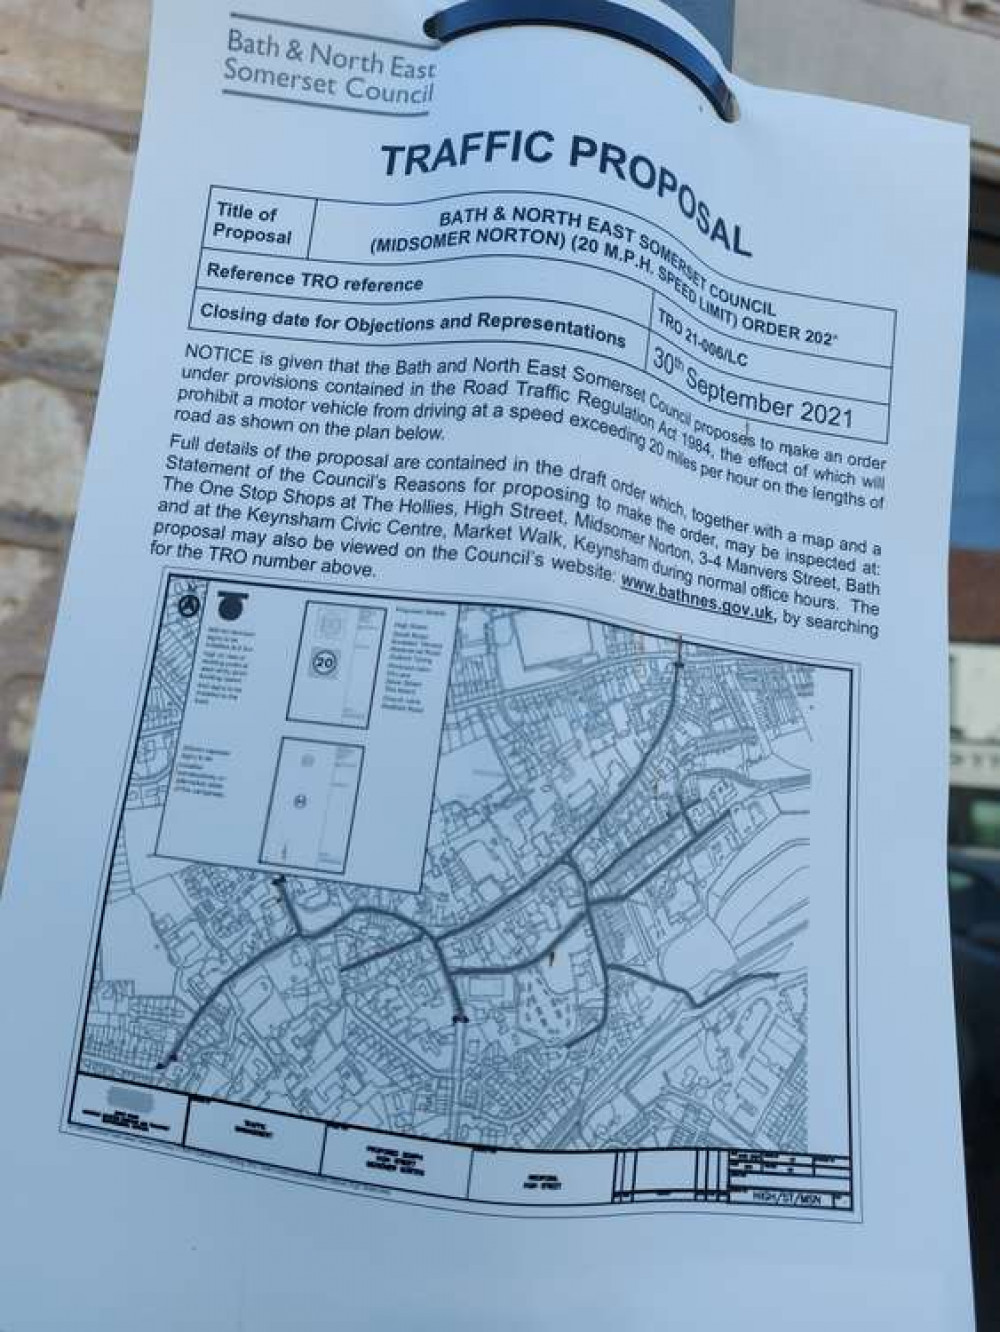 The traffic  details posted in Midsomer Norton